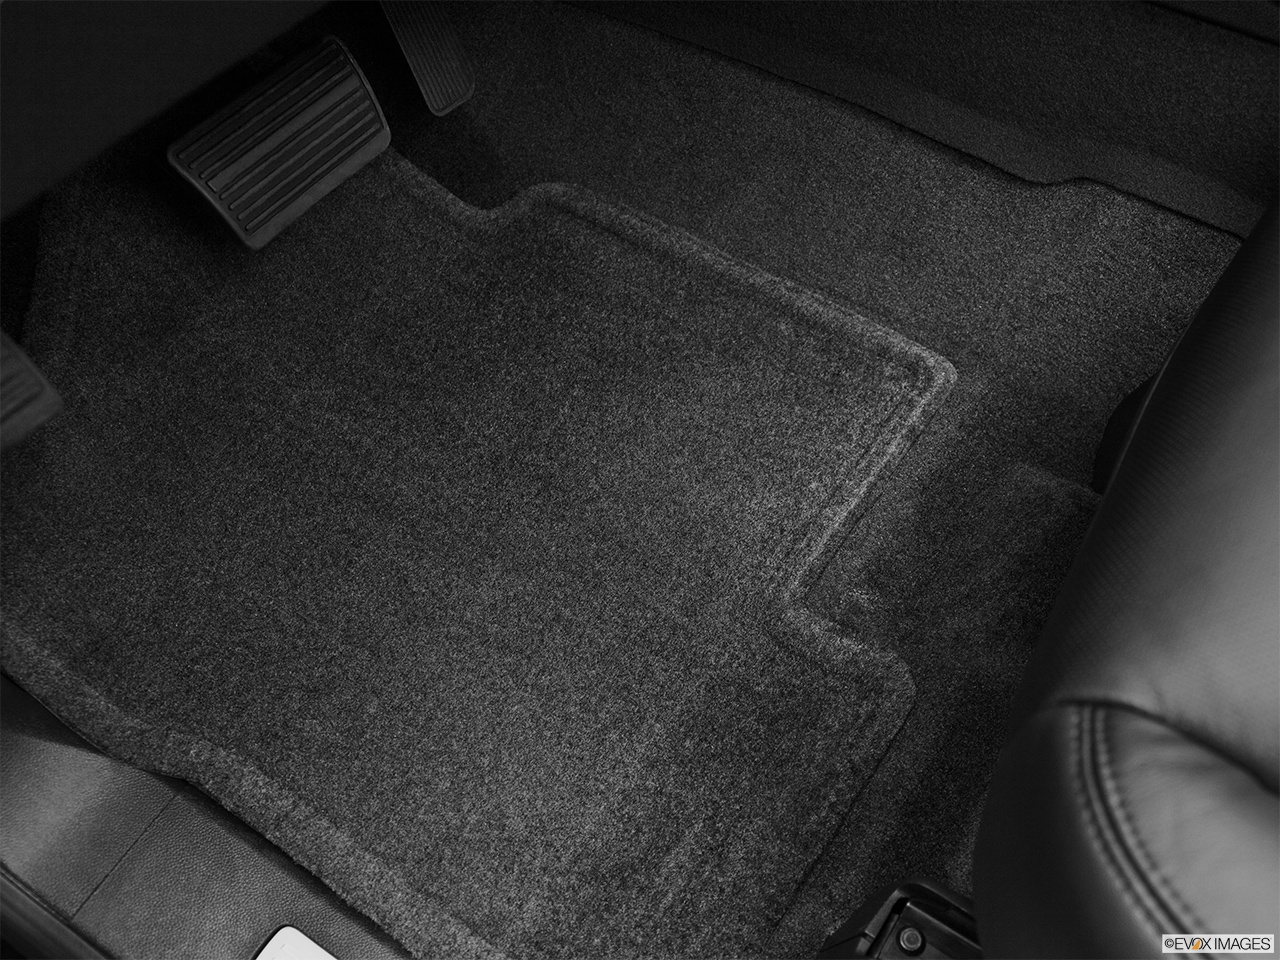 2012 Cadillac Escalade Hybrid Base Driver's floor mat and pedals. Mid-seat level from outside looking in. 